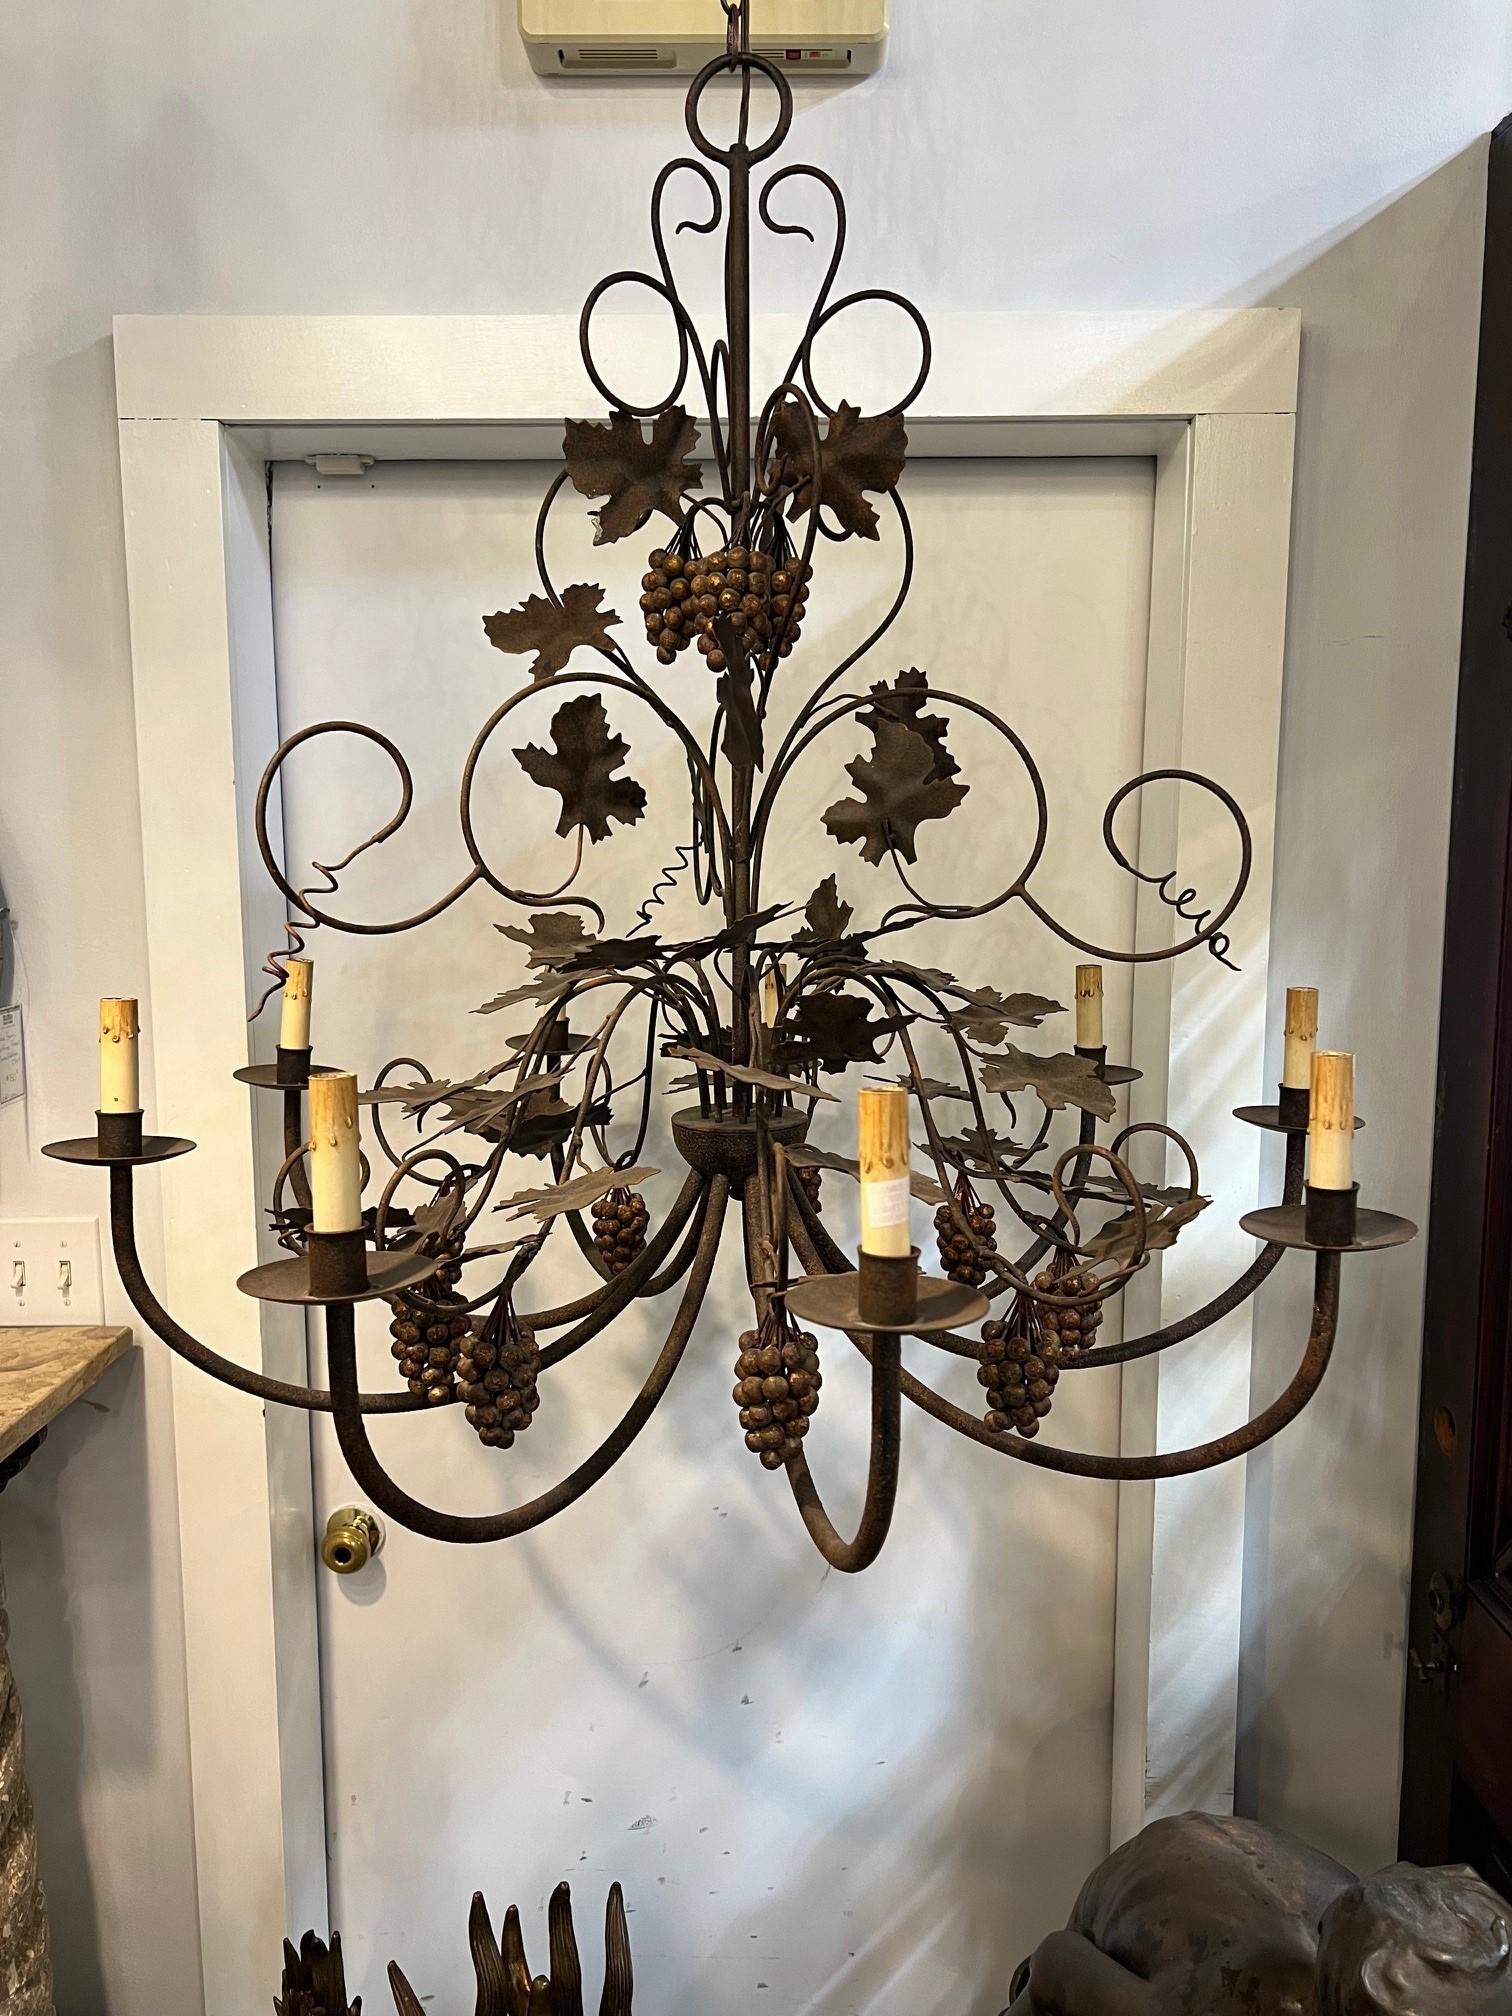 Beautiful chandelier, nine arms nine lights with grape vines, grapes and leaves. This chandelier would look great in a dining room or perfect in a wine cellar. Manufactured by Curry & Company in 2002 it was never installed and in good working